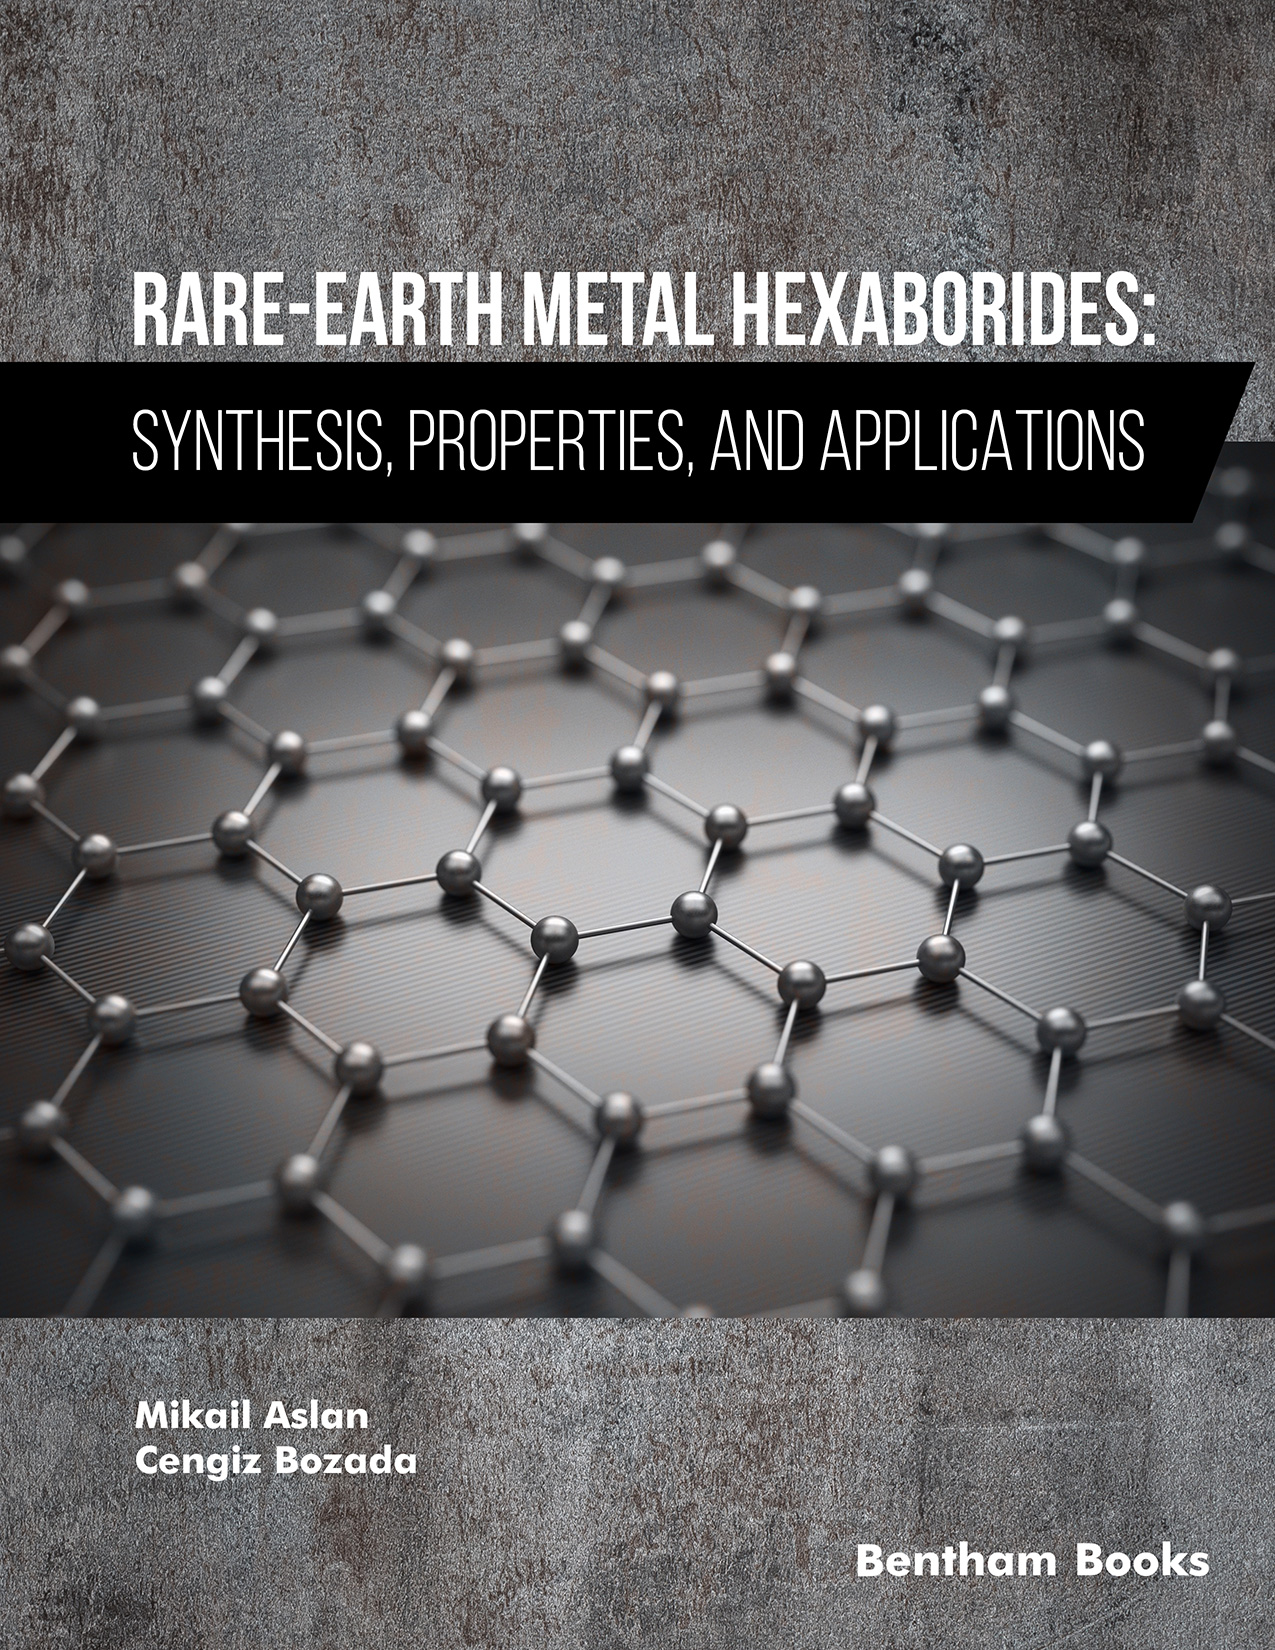 Rare-Earth Metal Hexaborides: Synthesis, Properties, and Applications